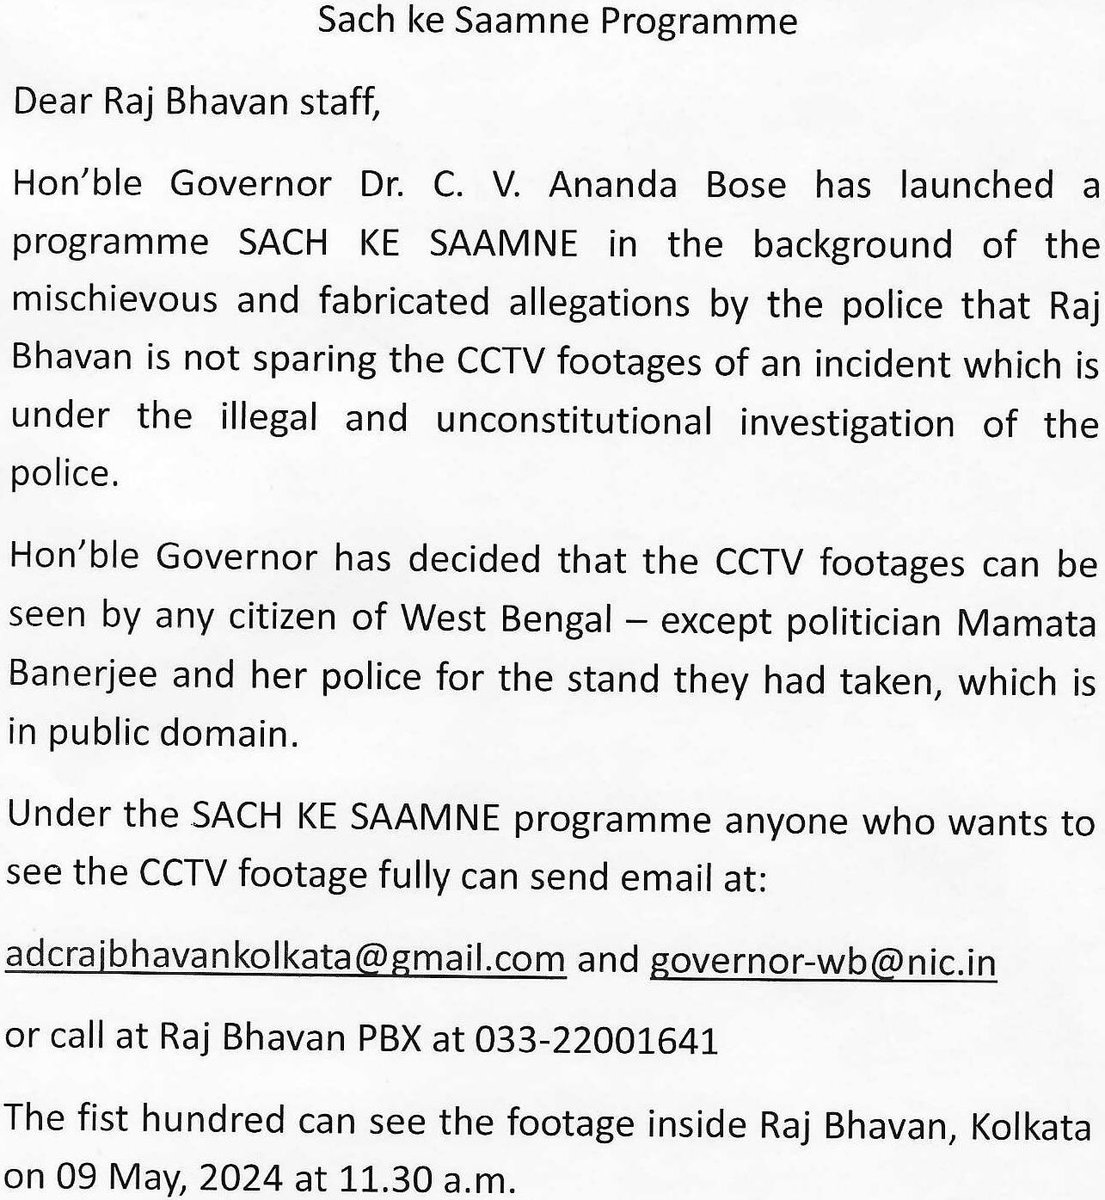 #Breaking: #WestBengal Governor Dr. CV Ananda Bose launches ‘Sach ke Saamne’ programme against the molestation charges levelled against him. Raj bhavan will release CCTV footage to any citizen except West Bengal CM & police on May 9 at 11:30am.